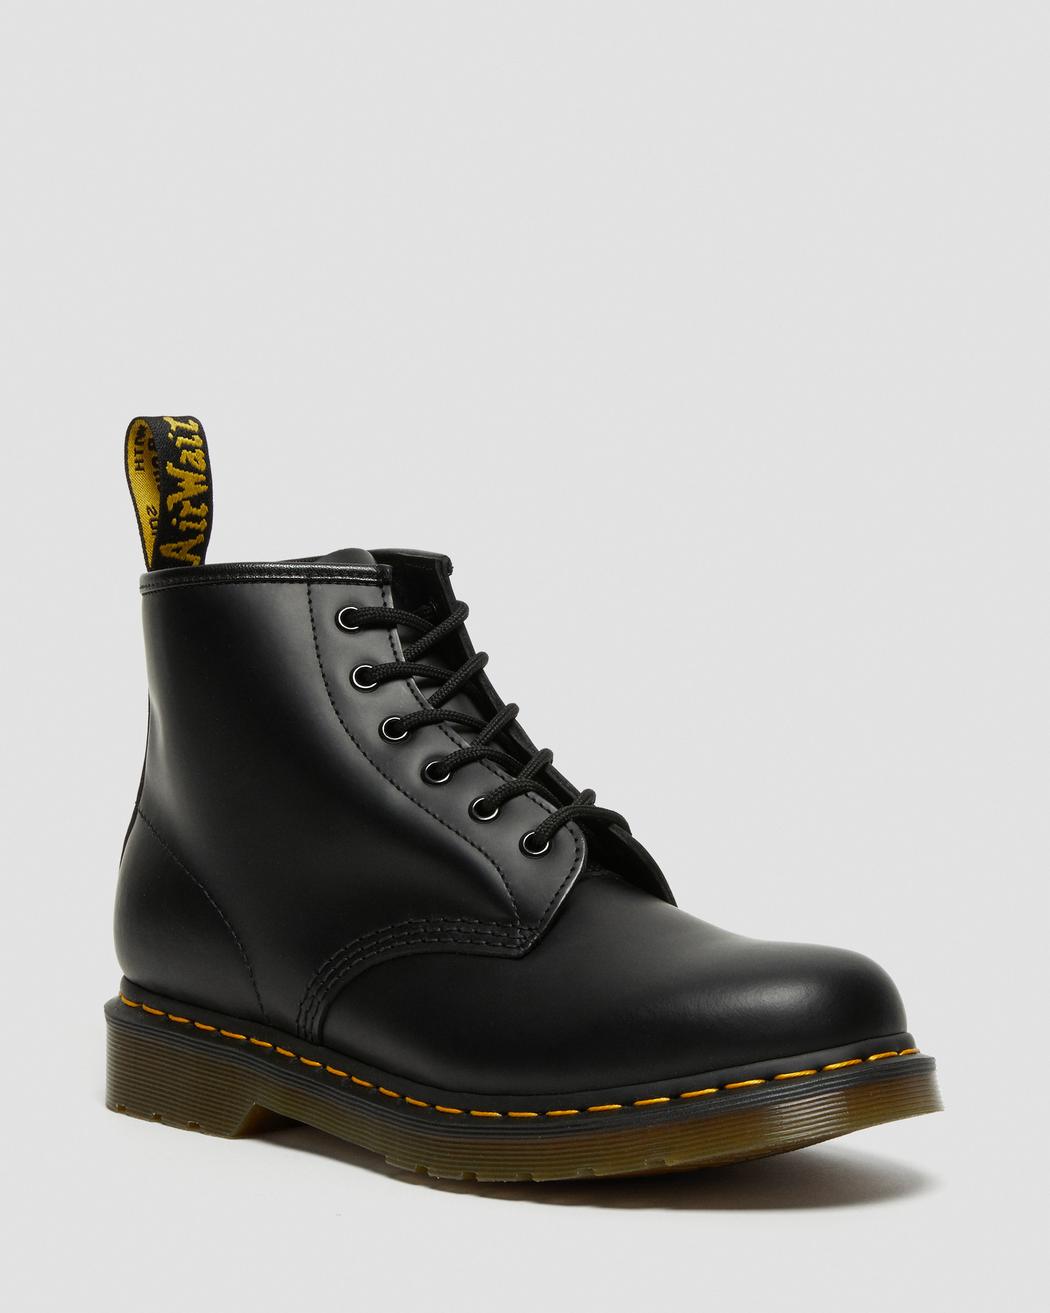 101 SMOOTH LEATHER LACE UP BOOTS | Dr. Martens